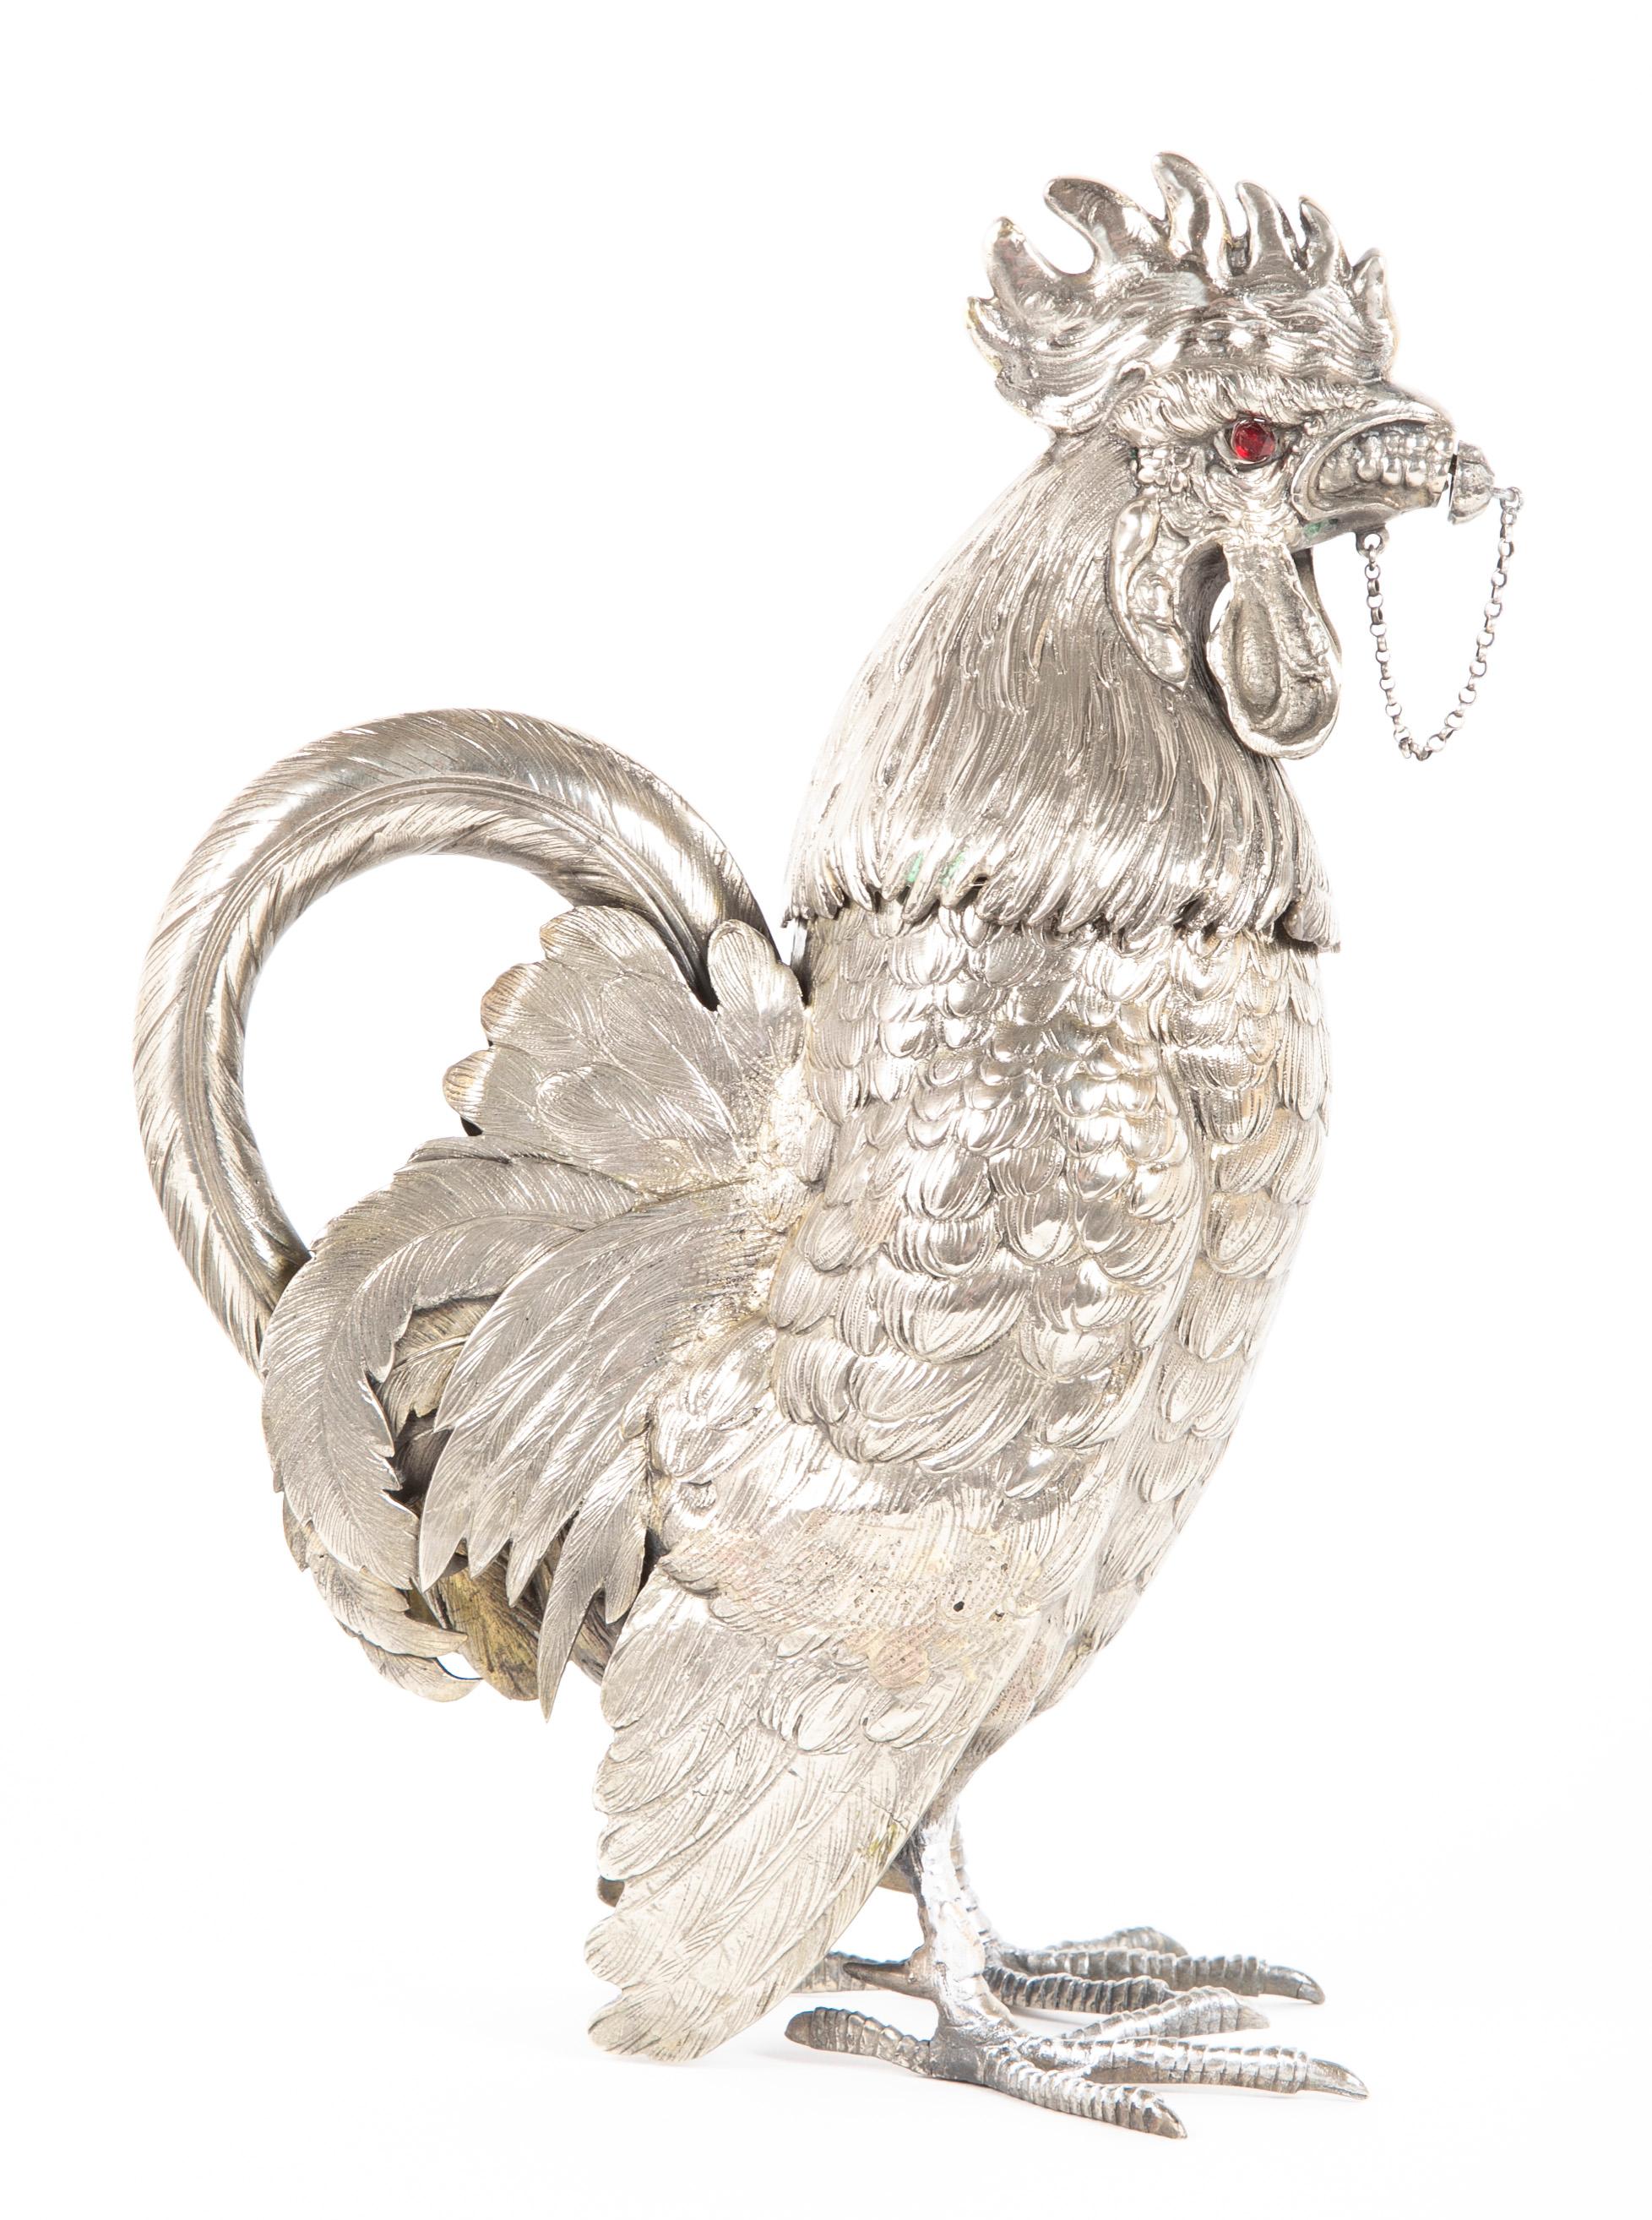 Rooster cocktail shaker by Ludwig Nersheimer. Removable interior holds liquid & ice. Fine workmanship. Very collectable. Germany. Circa 1900 - 1910.